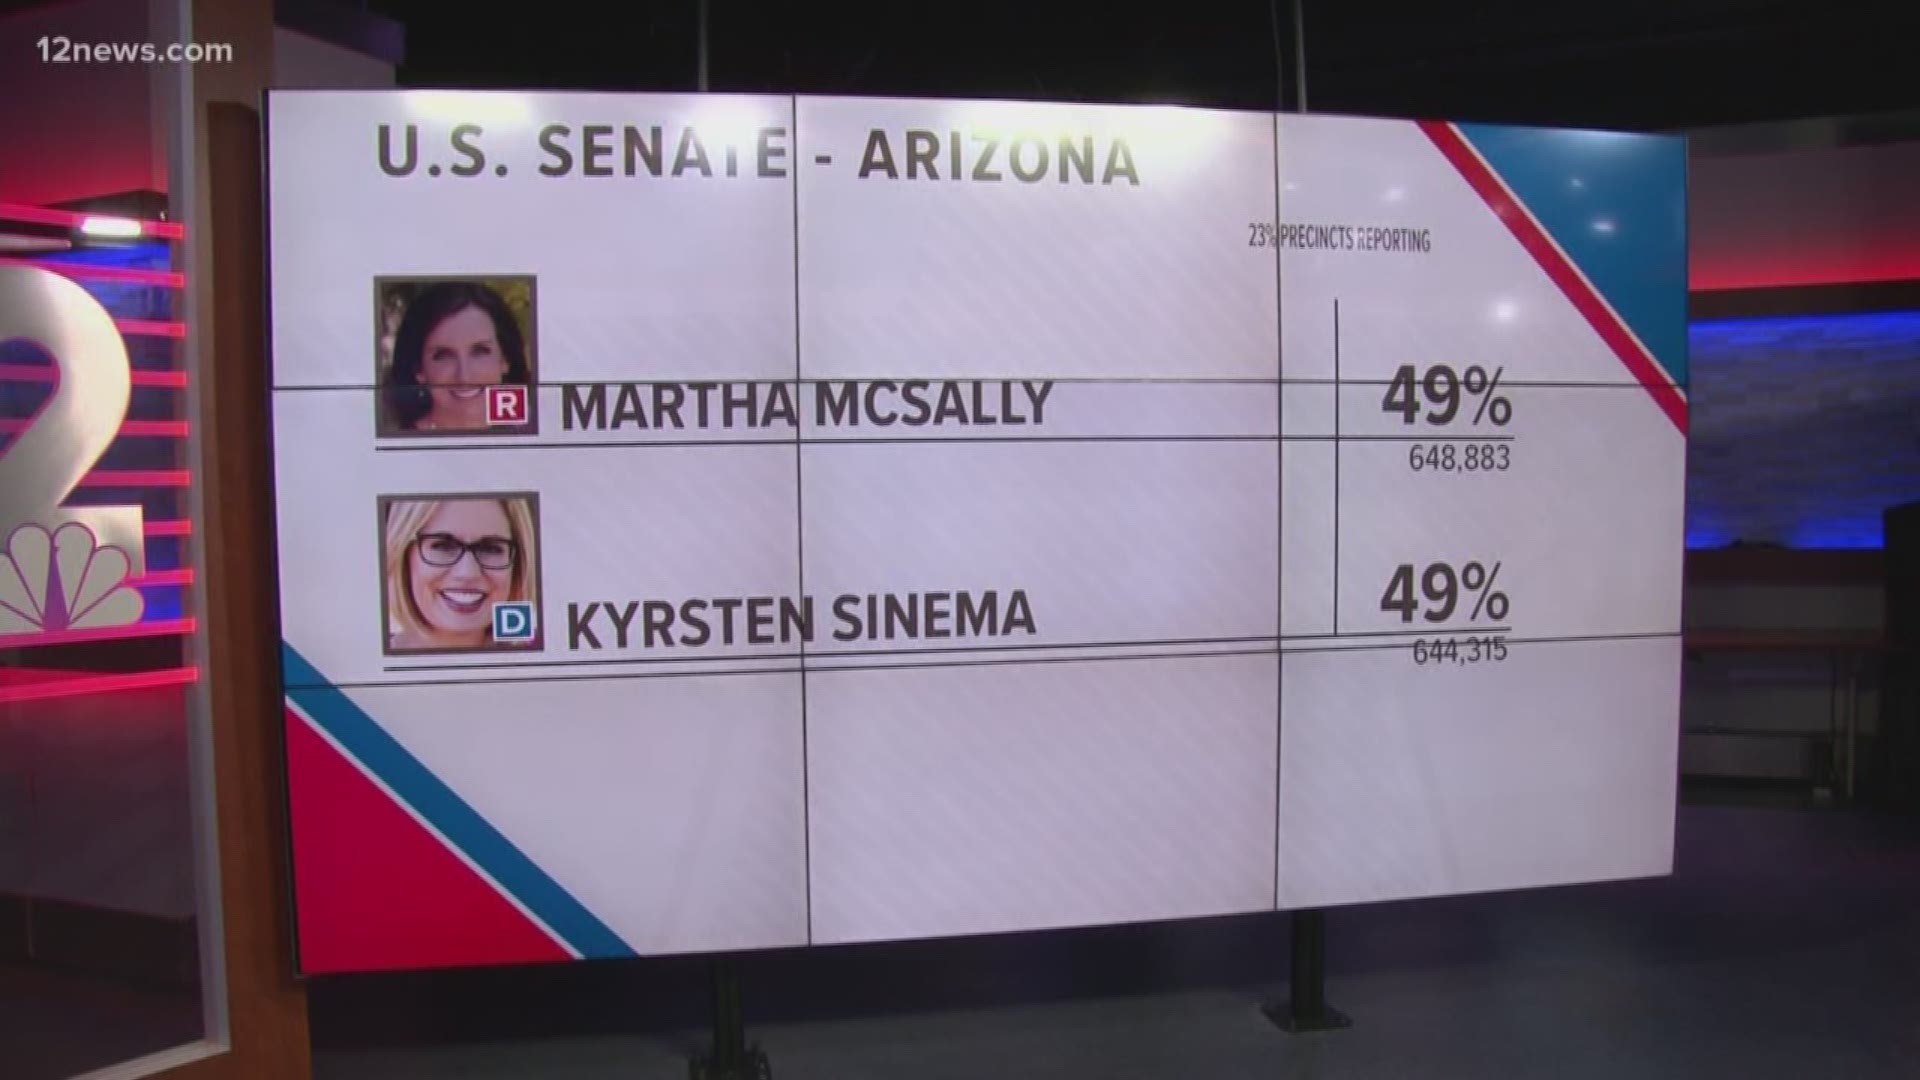 The race between Kyrsten Sinema and Martha McSally is still too close to call. Our political insiders look ahead to what's next for Arizona.